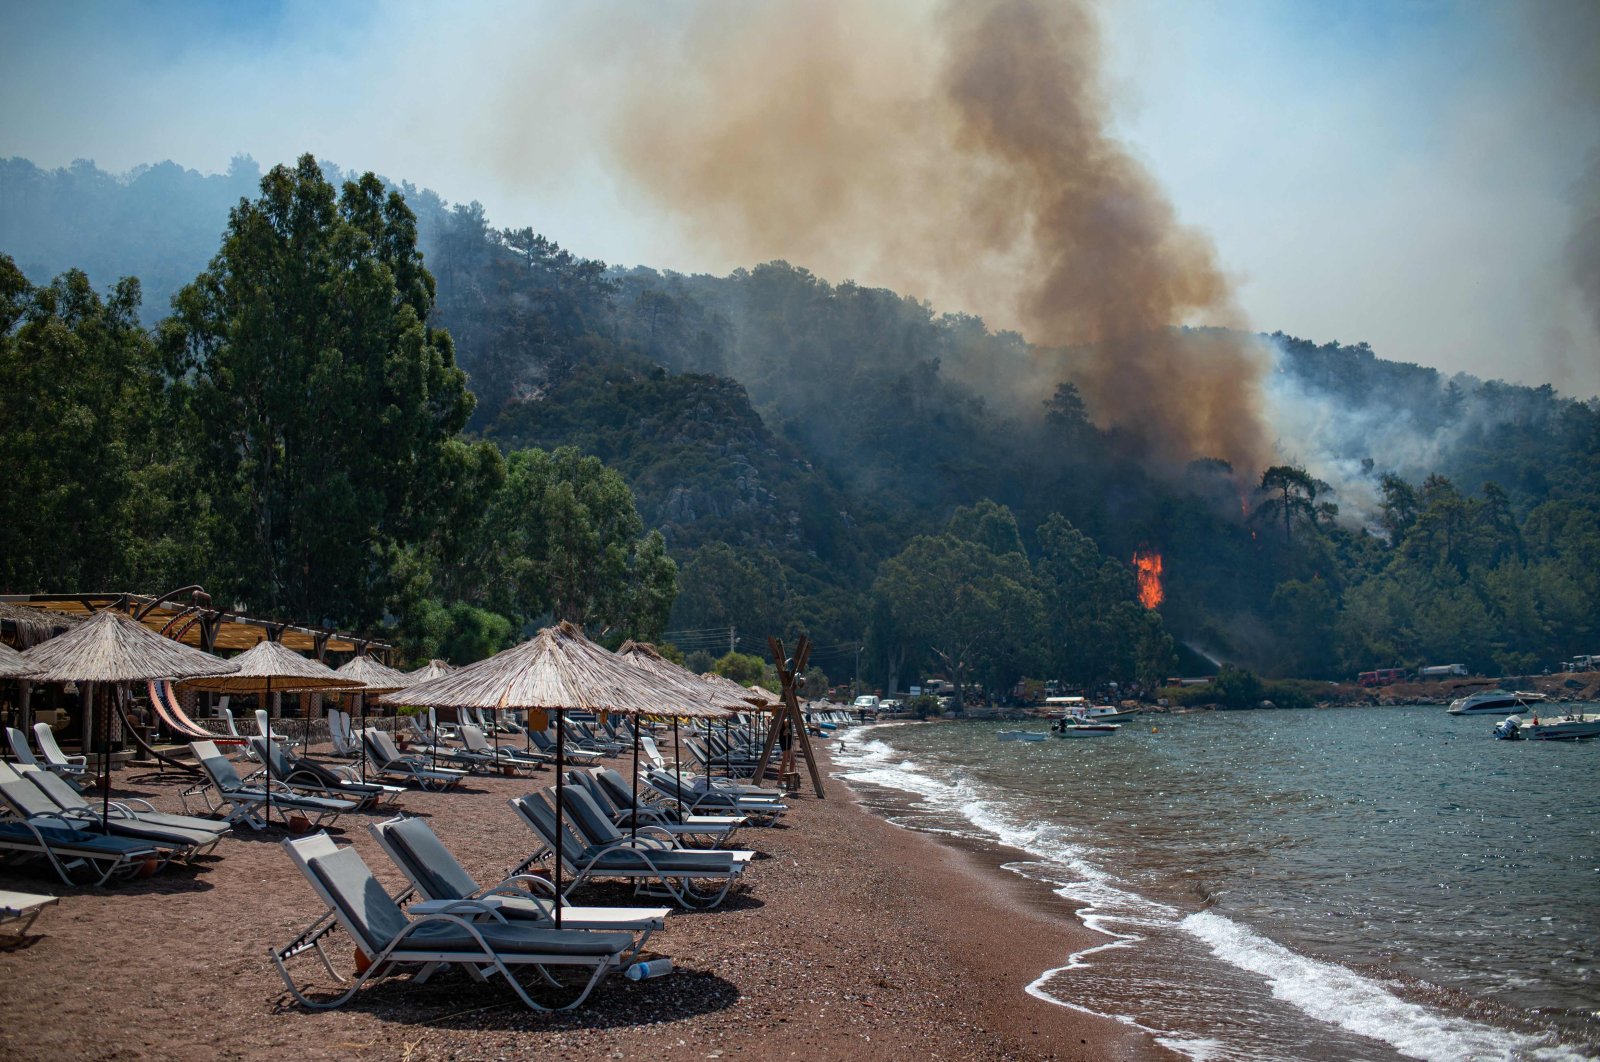 Deck chairs are seen on a beach in front of smoke and flames rising from a forest fire in the Muğla district of Marmaris, Turkey, Aug. 3, 2021. (AFP Photo)